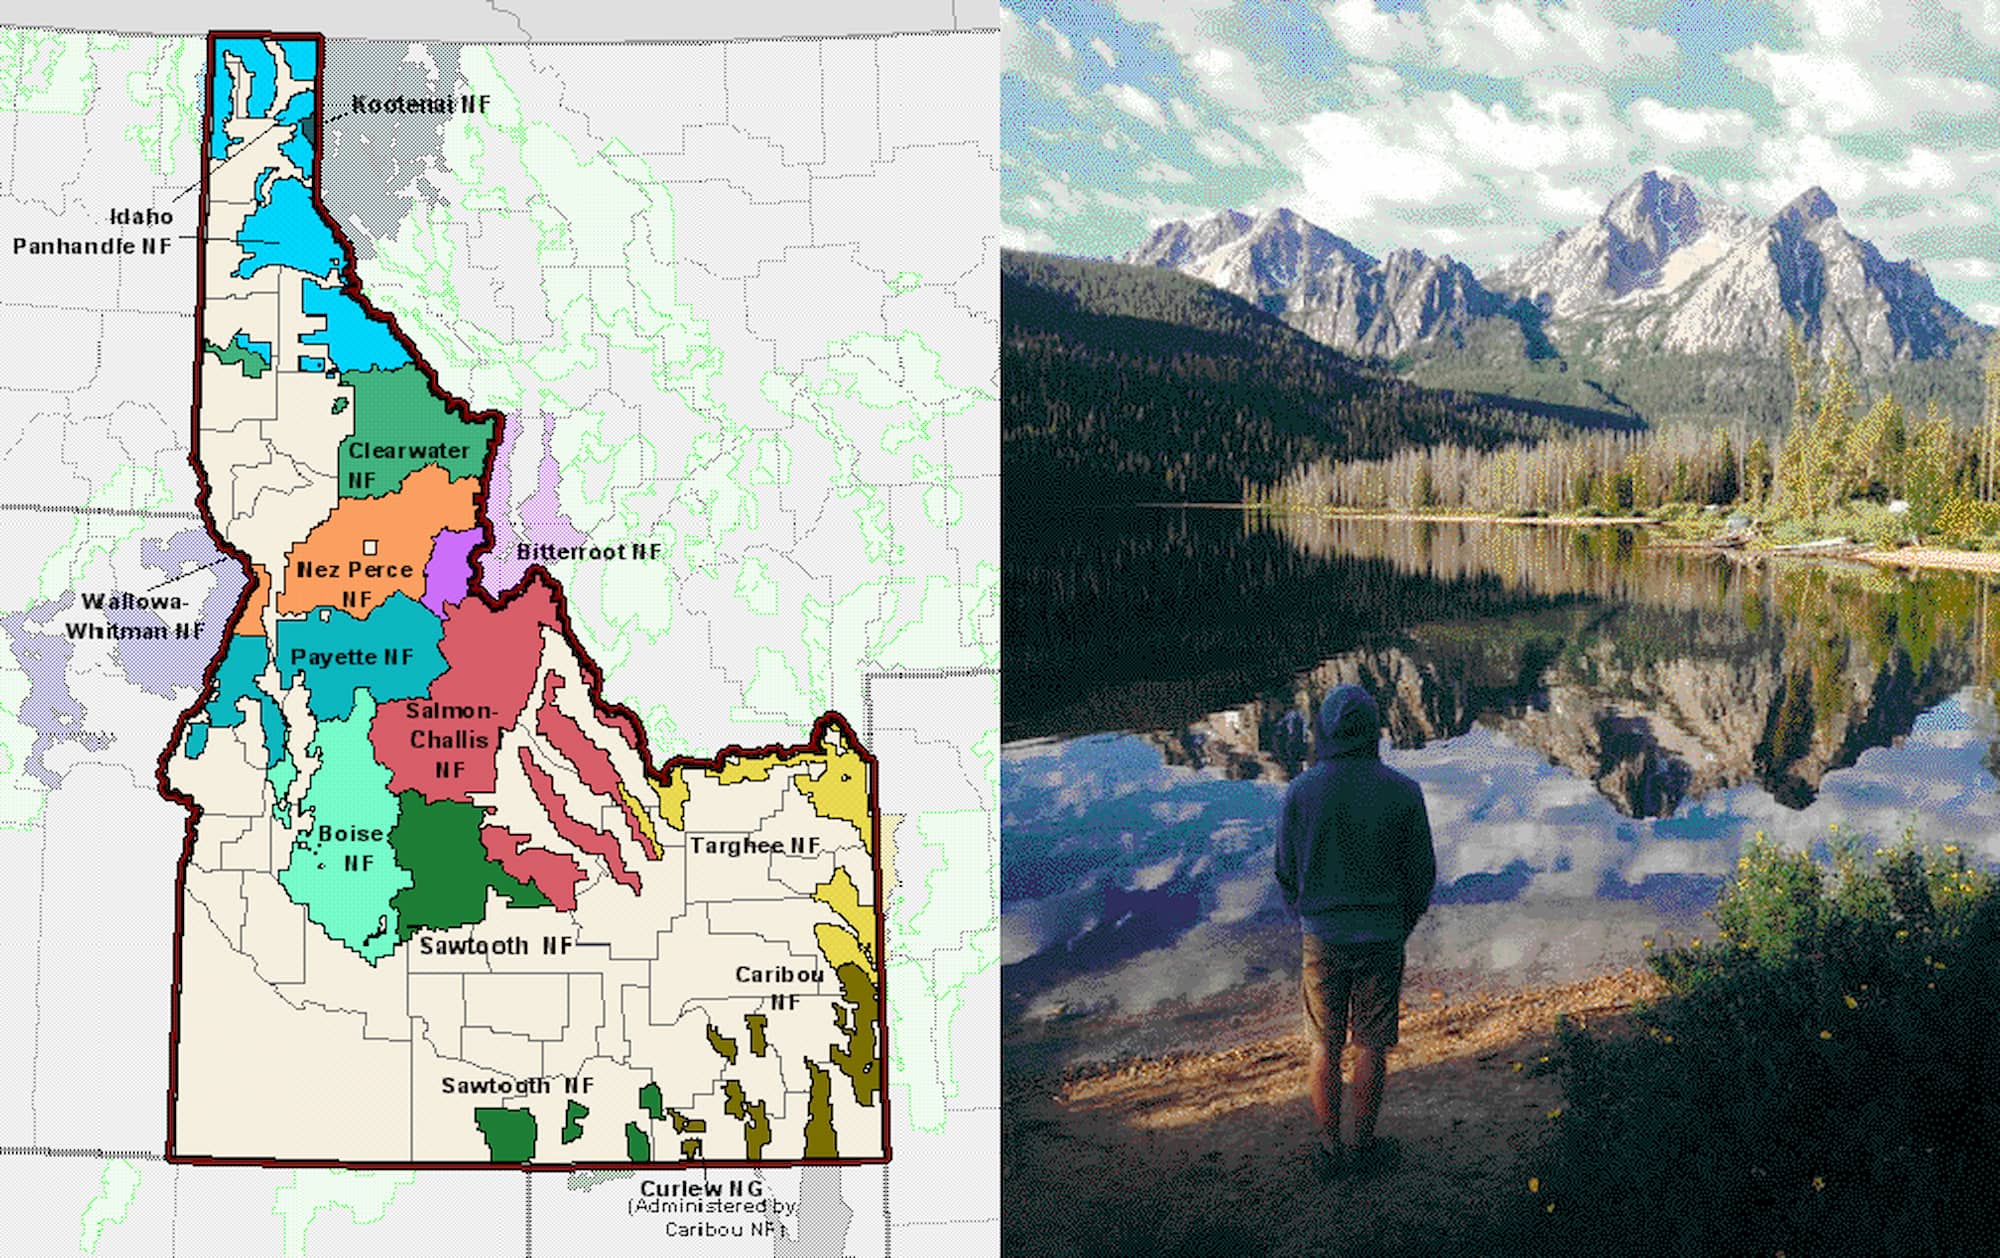 Left Image: Map of National Forest land in Idaho. Right: Person standing beside a lake in the one of Idaho's National Forests.